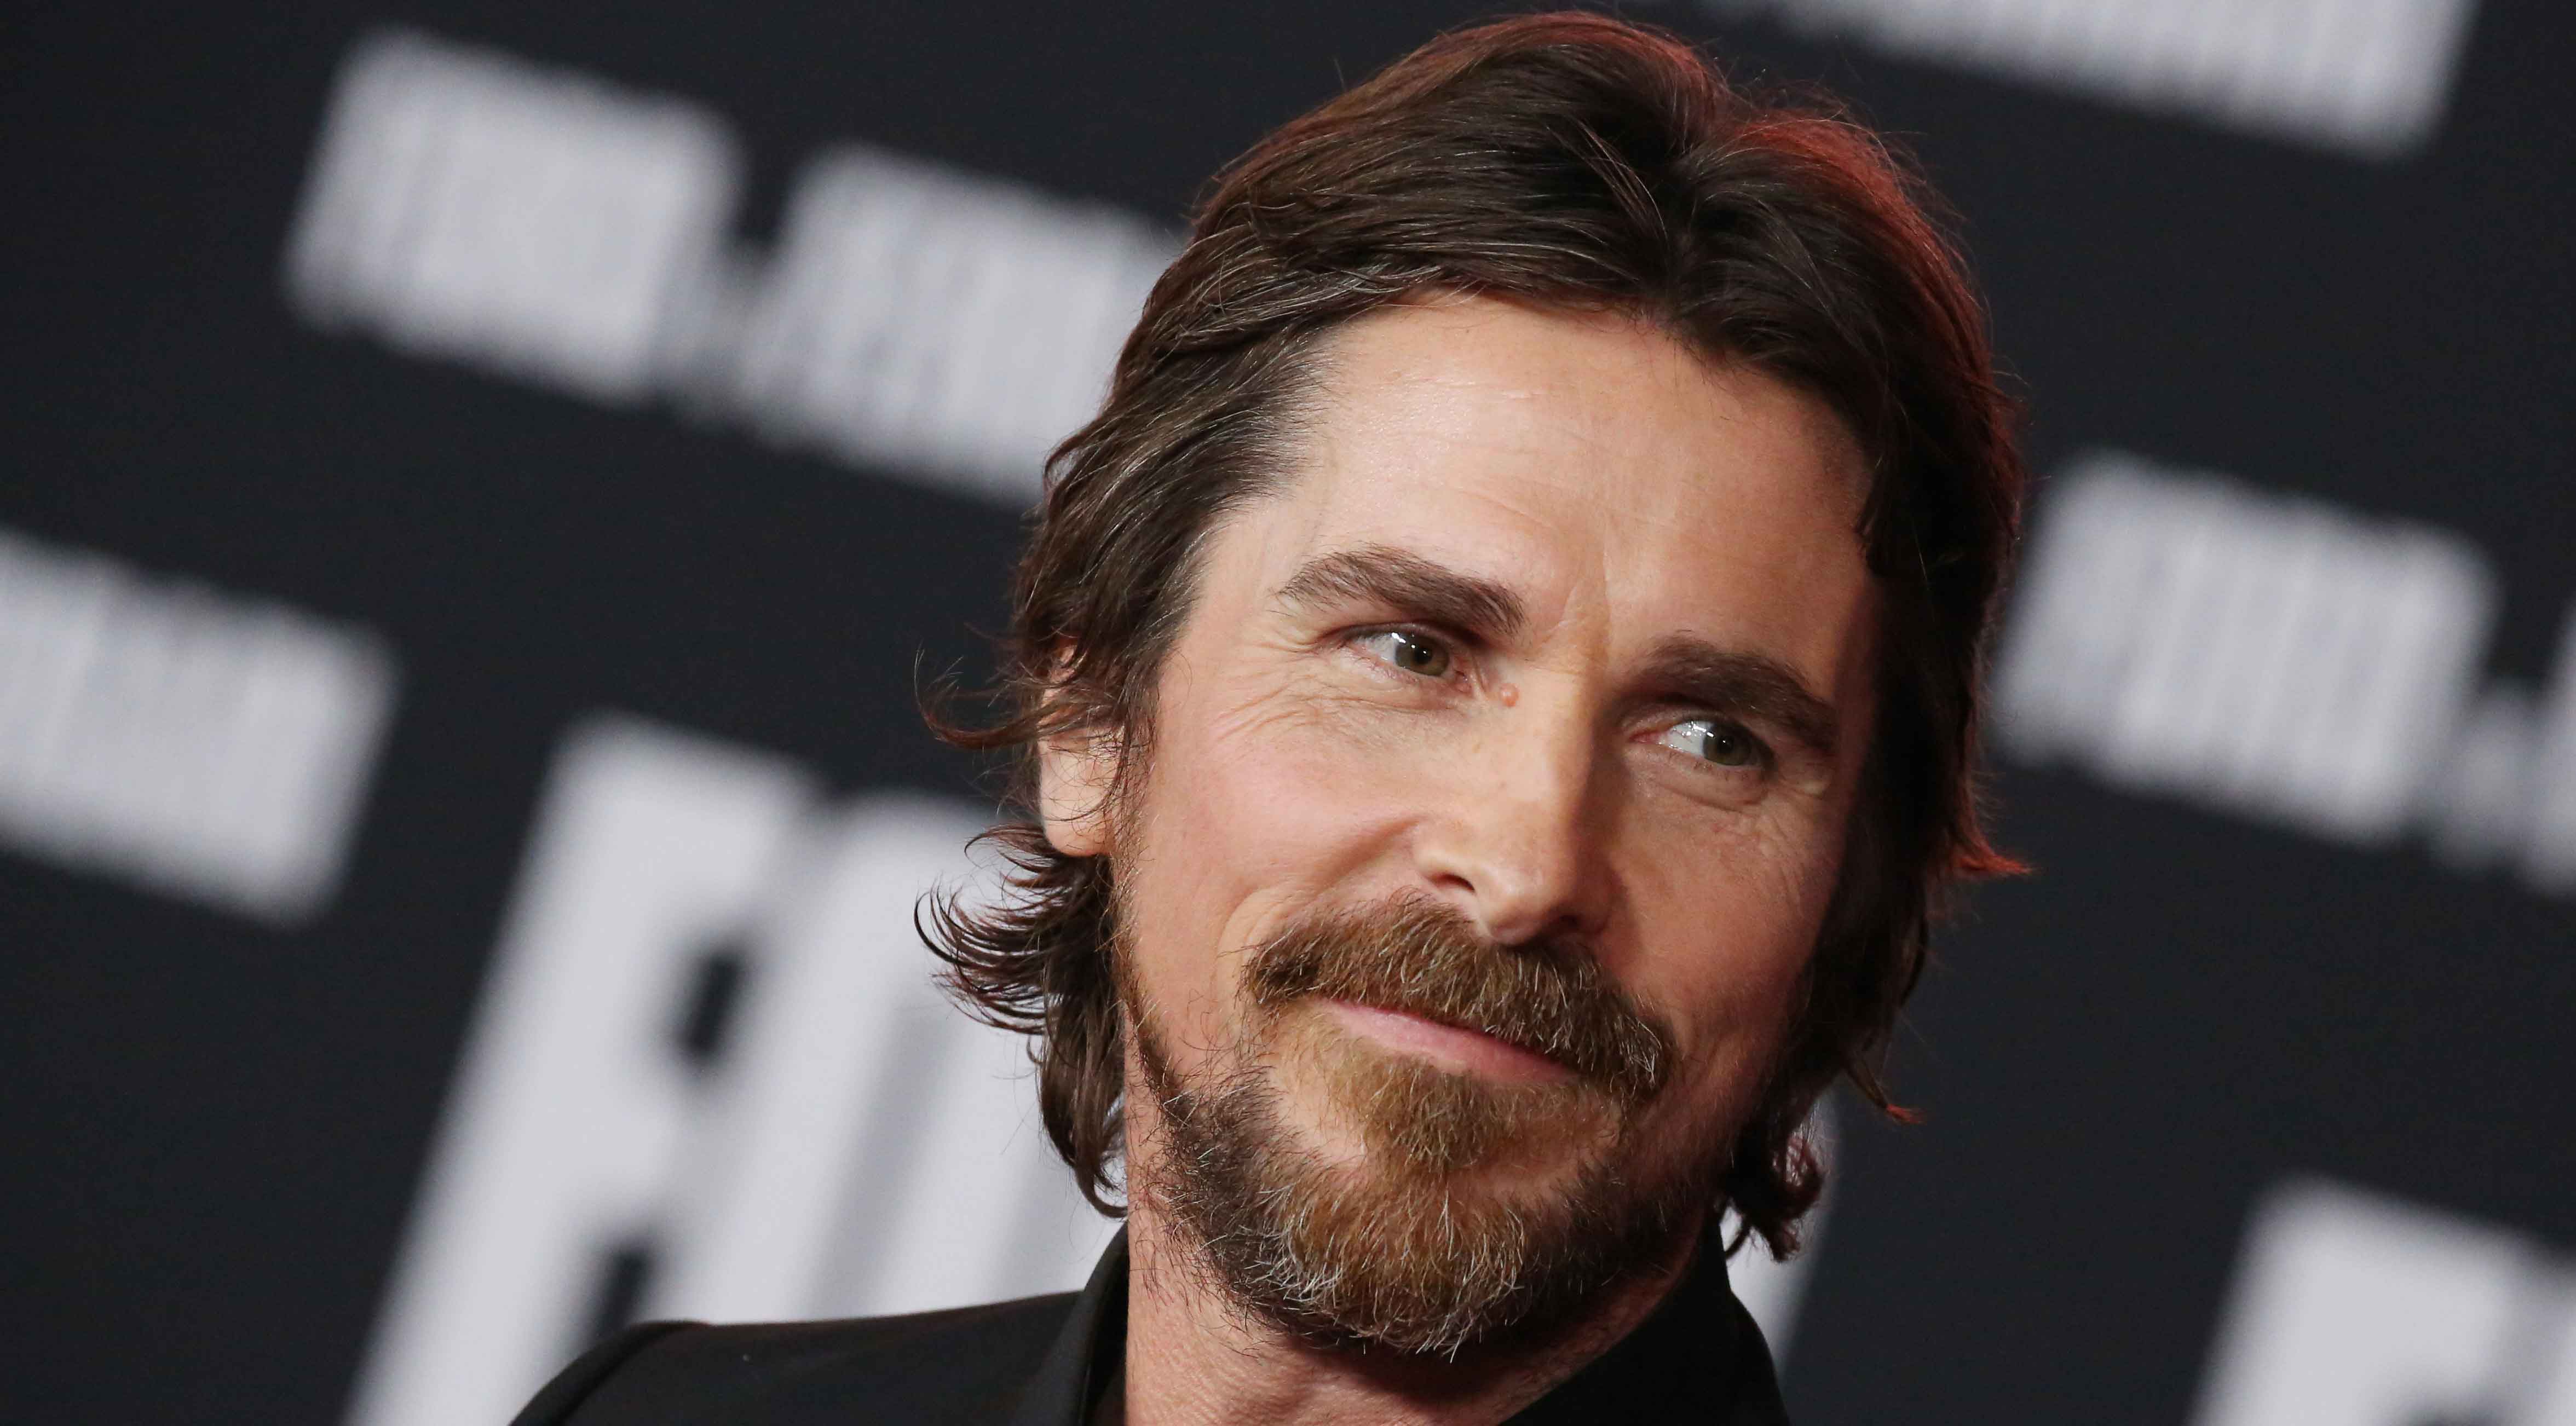 You Can't Take Eyes Off Him: Chris Hemsworth On Christian Bale's